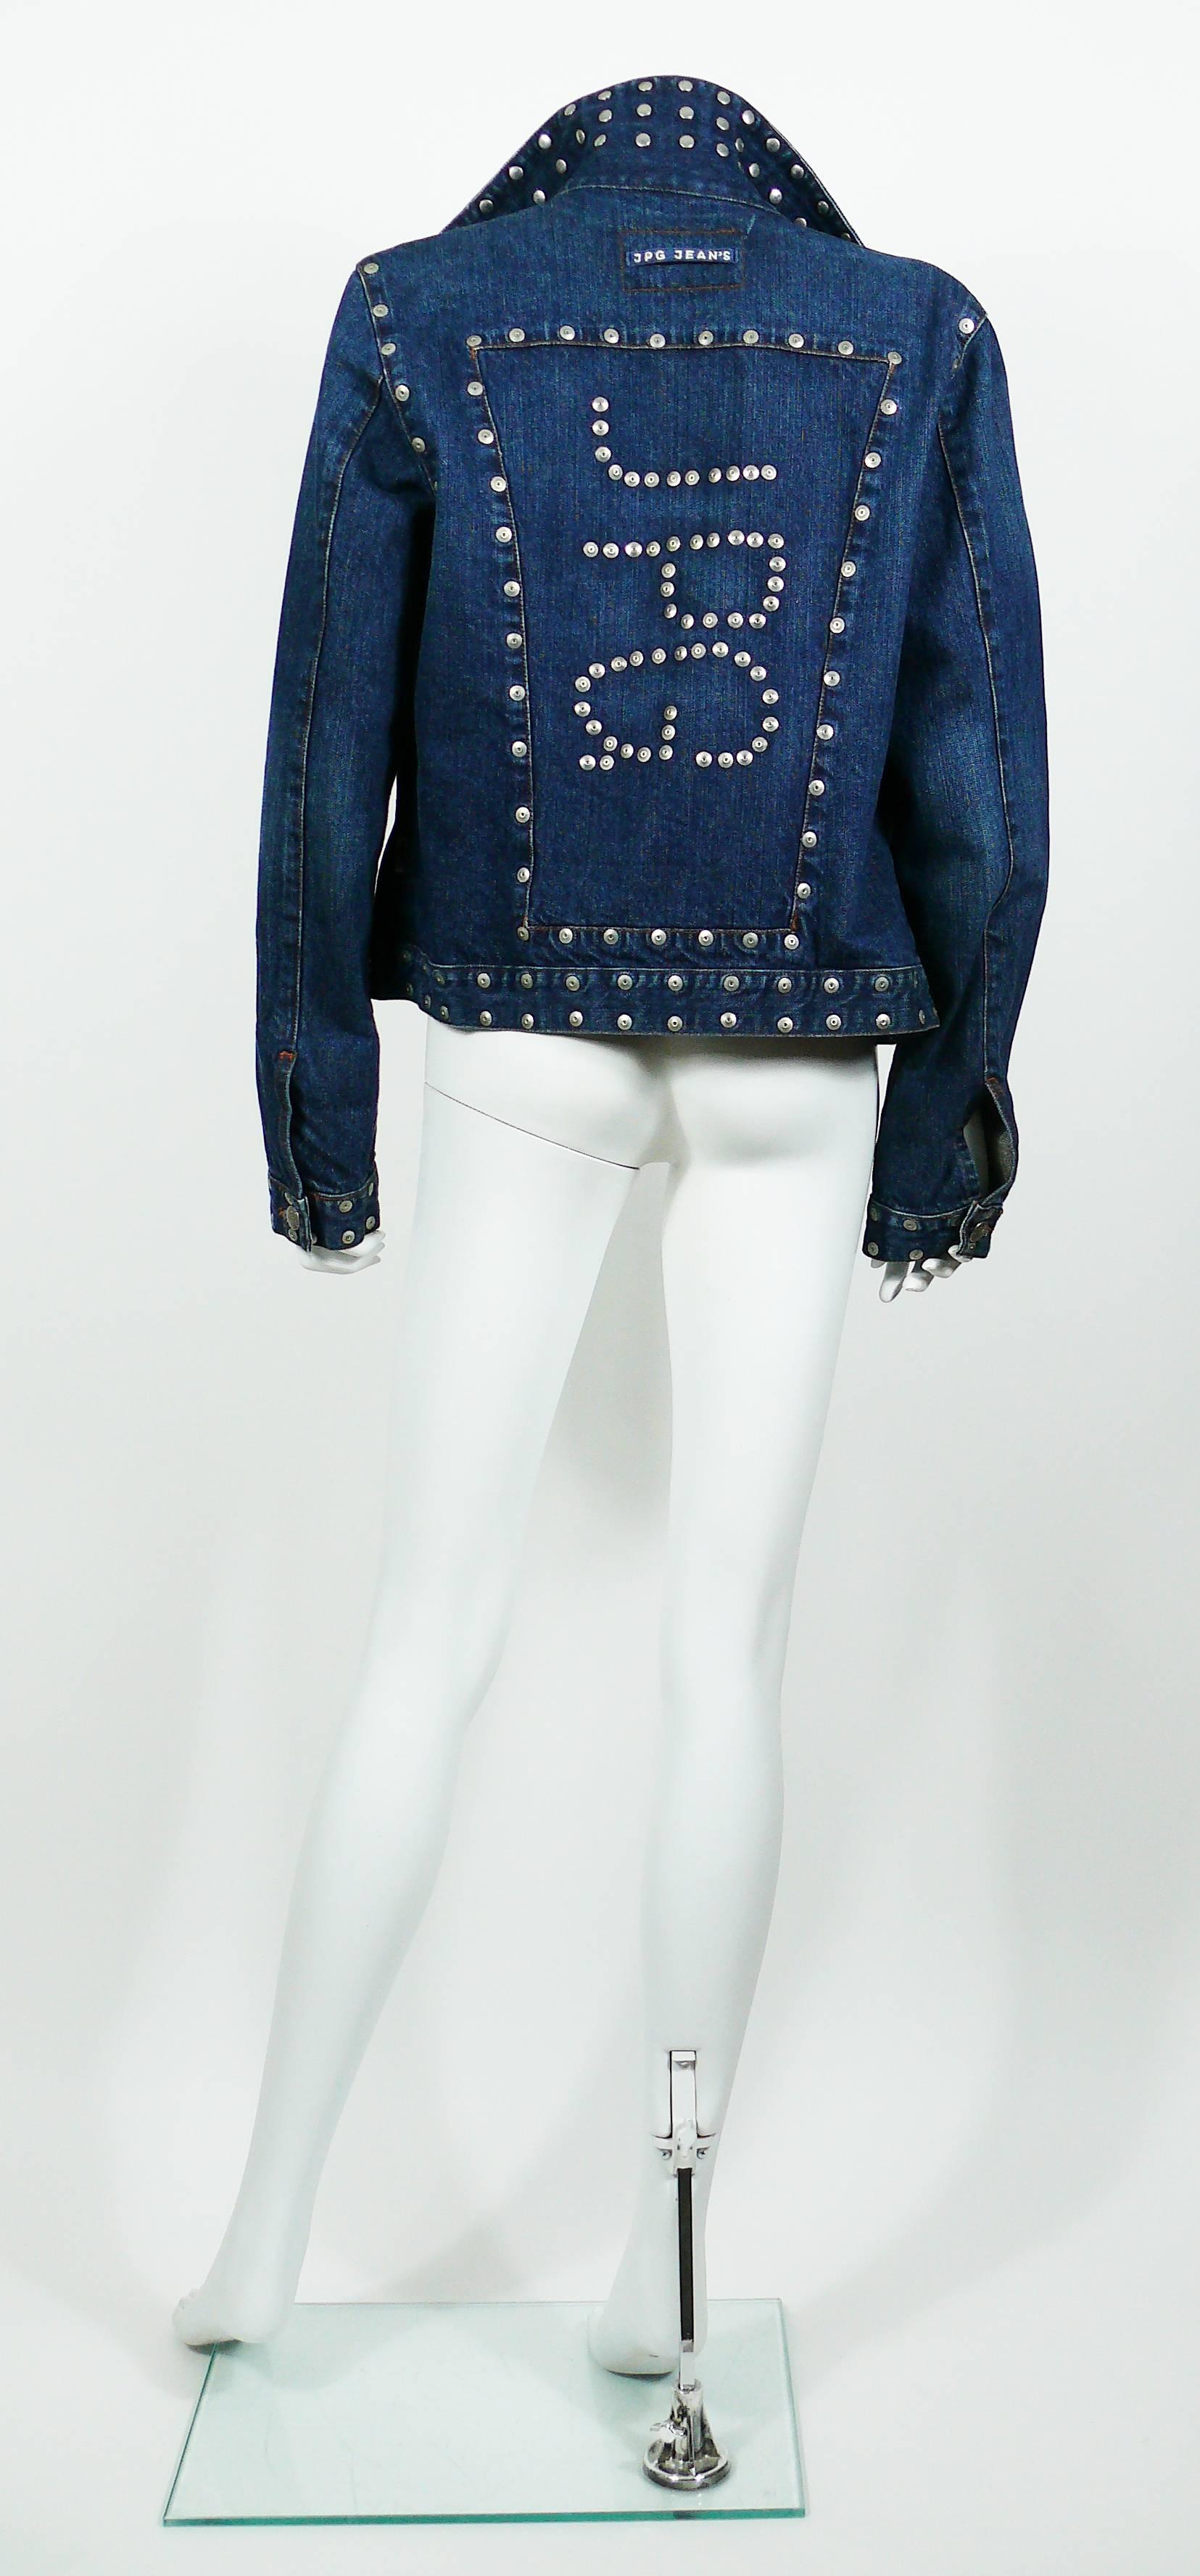 JEAN PAUL GAULTIER vintage studded denim jacket.

This jacket features :
- Silver toned studs details throughout, including JPG initials on the back.
- Classic collar.
- Two chest pockets.
- Front and cuff buttoning.
- Silver toned signature